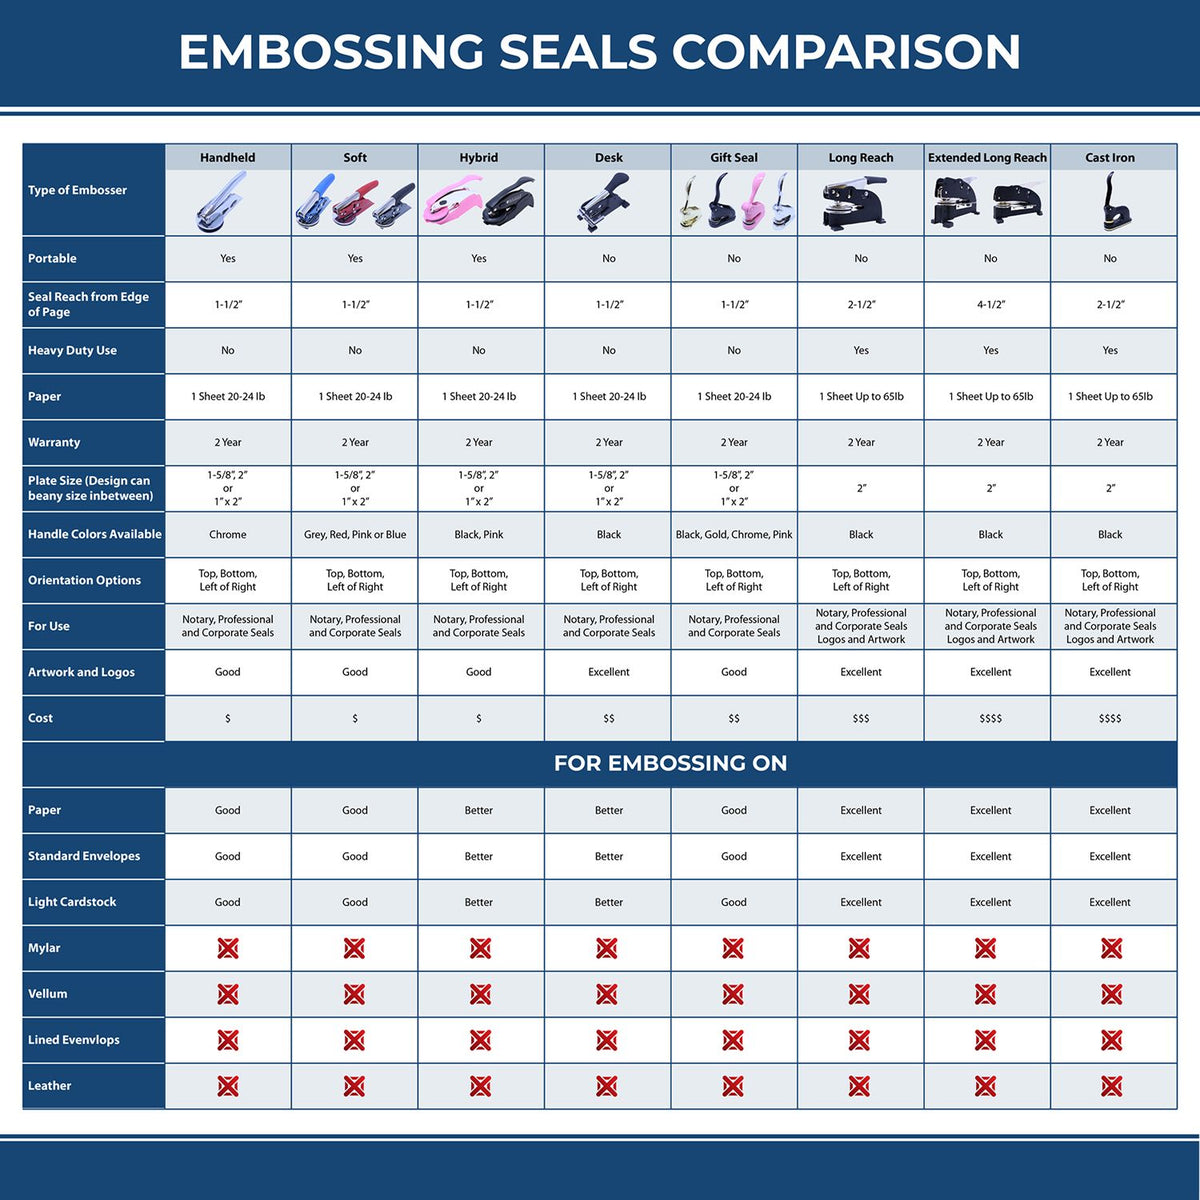 A comparison chart for the different types of mount models available for the Extended Long Reach Kentucky Surveyor Embosser.